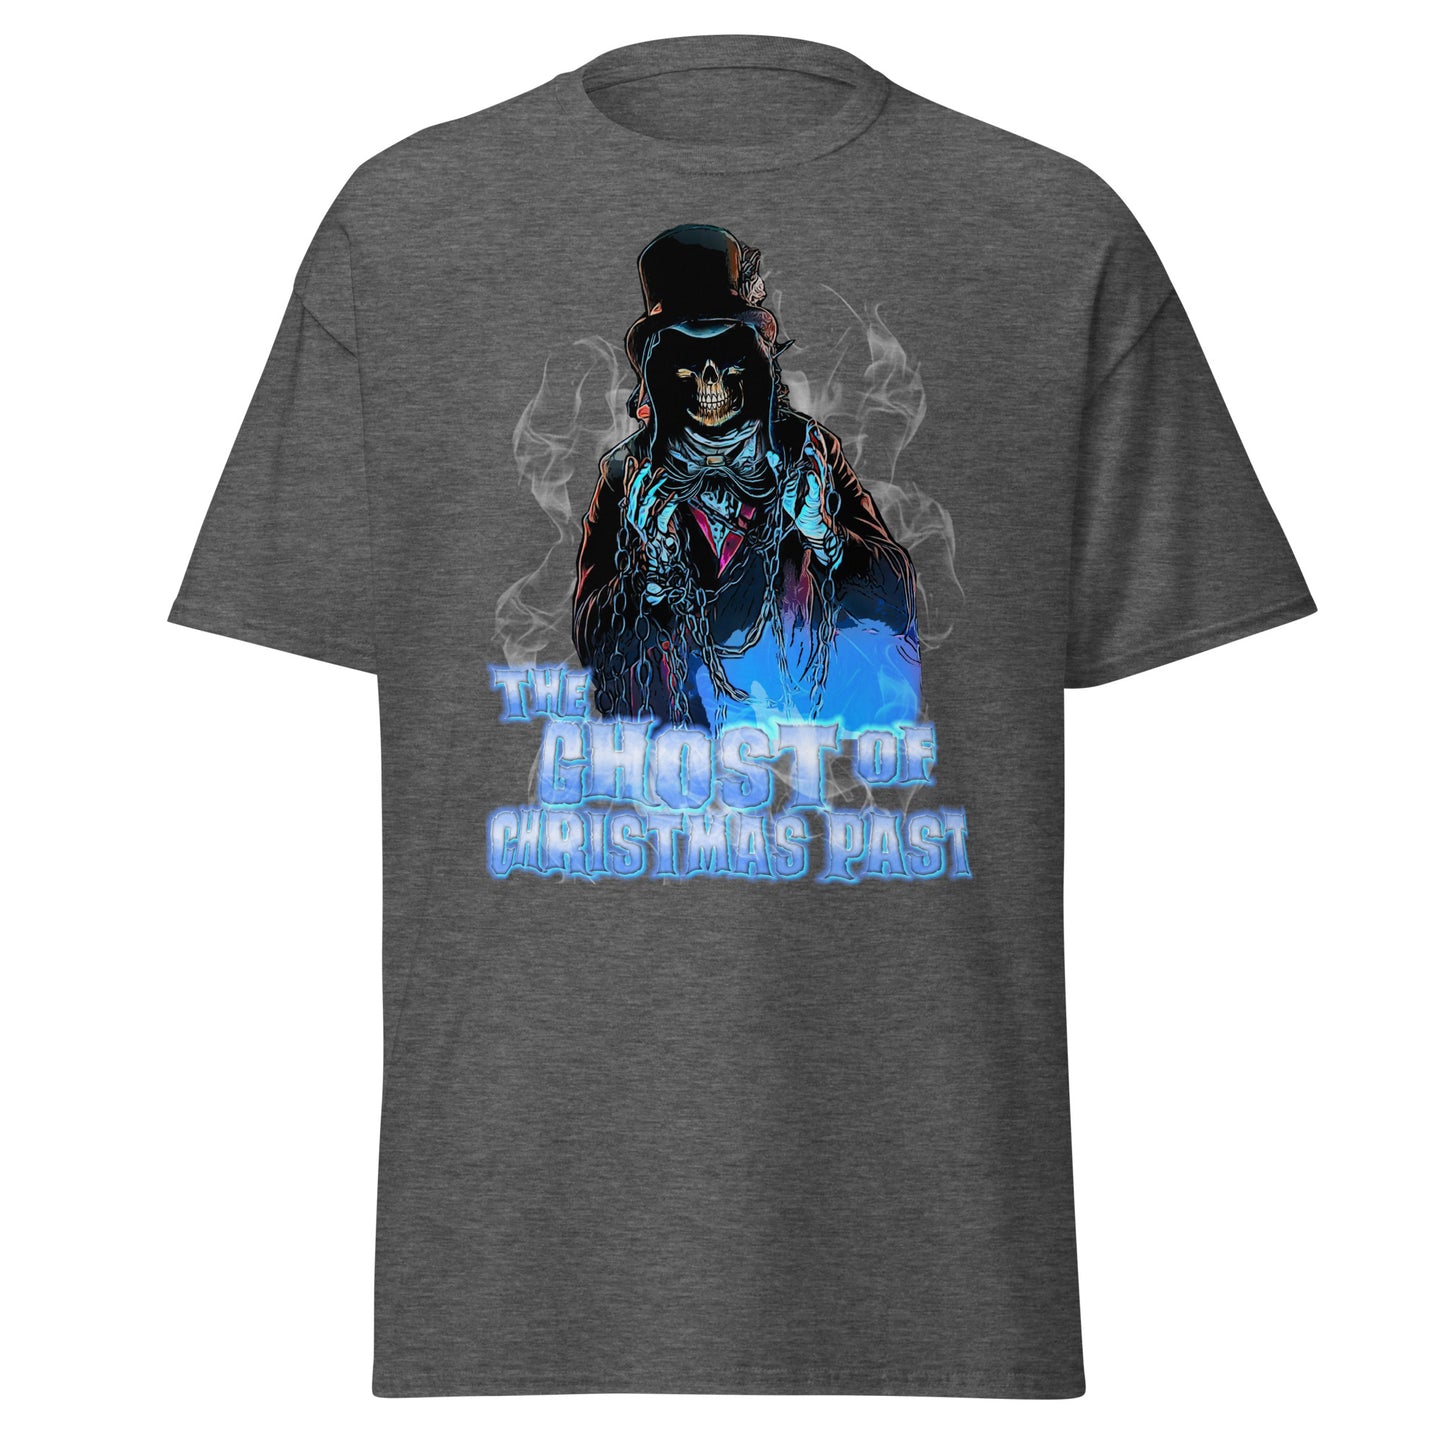 The Ghost of Christmas Past T-Shirt - Haunting Nostalgia